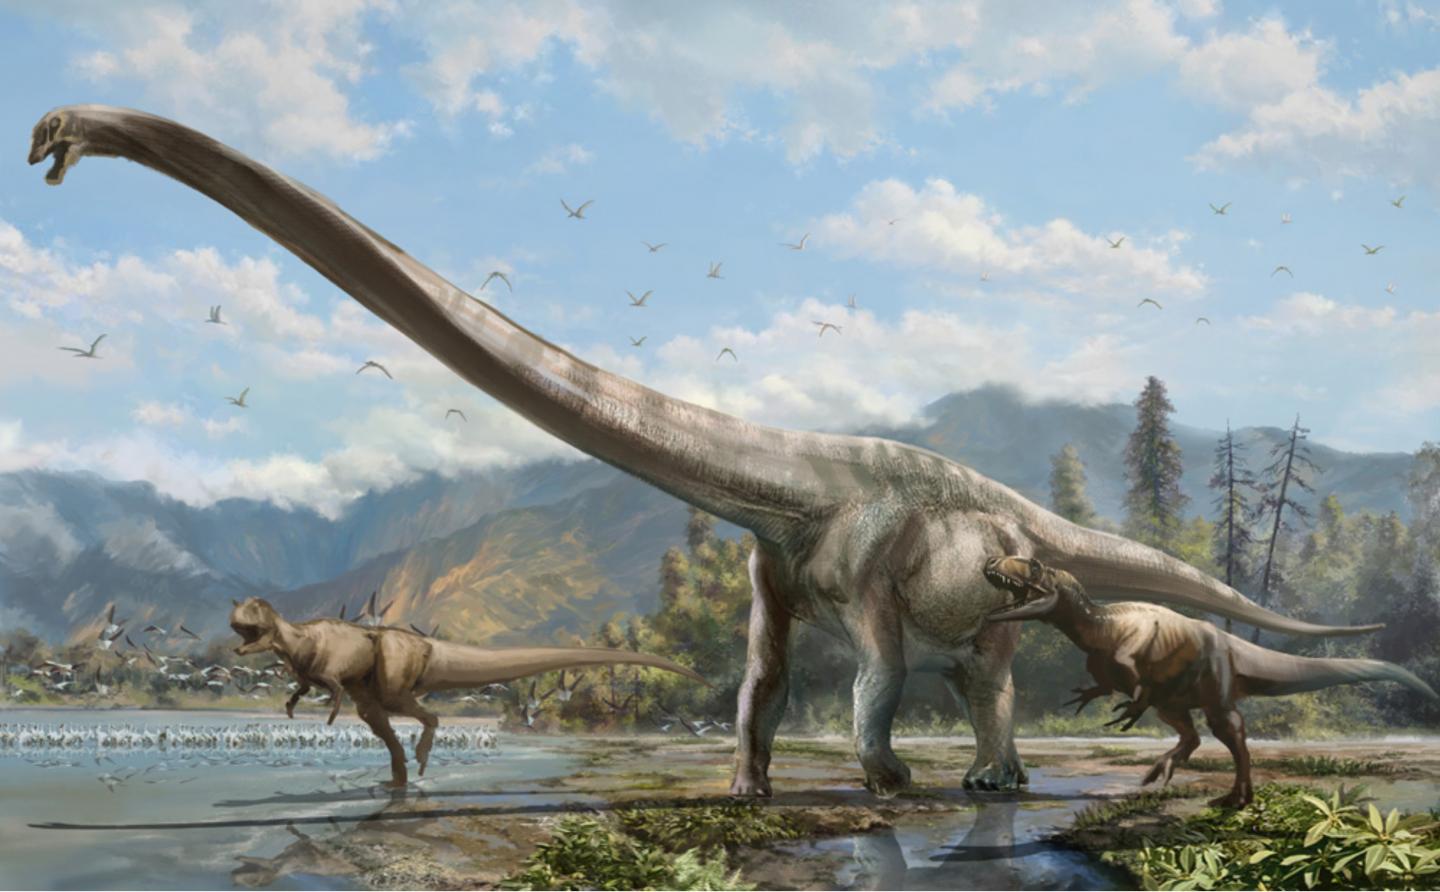 Reconstruction of the Long-Necked Dinosaur